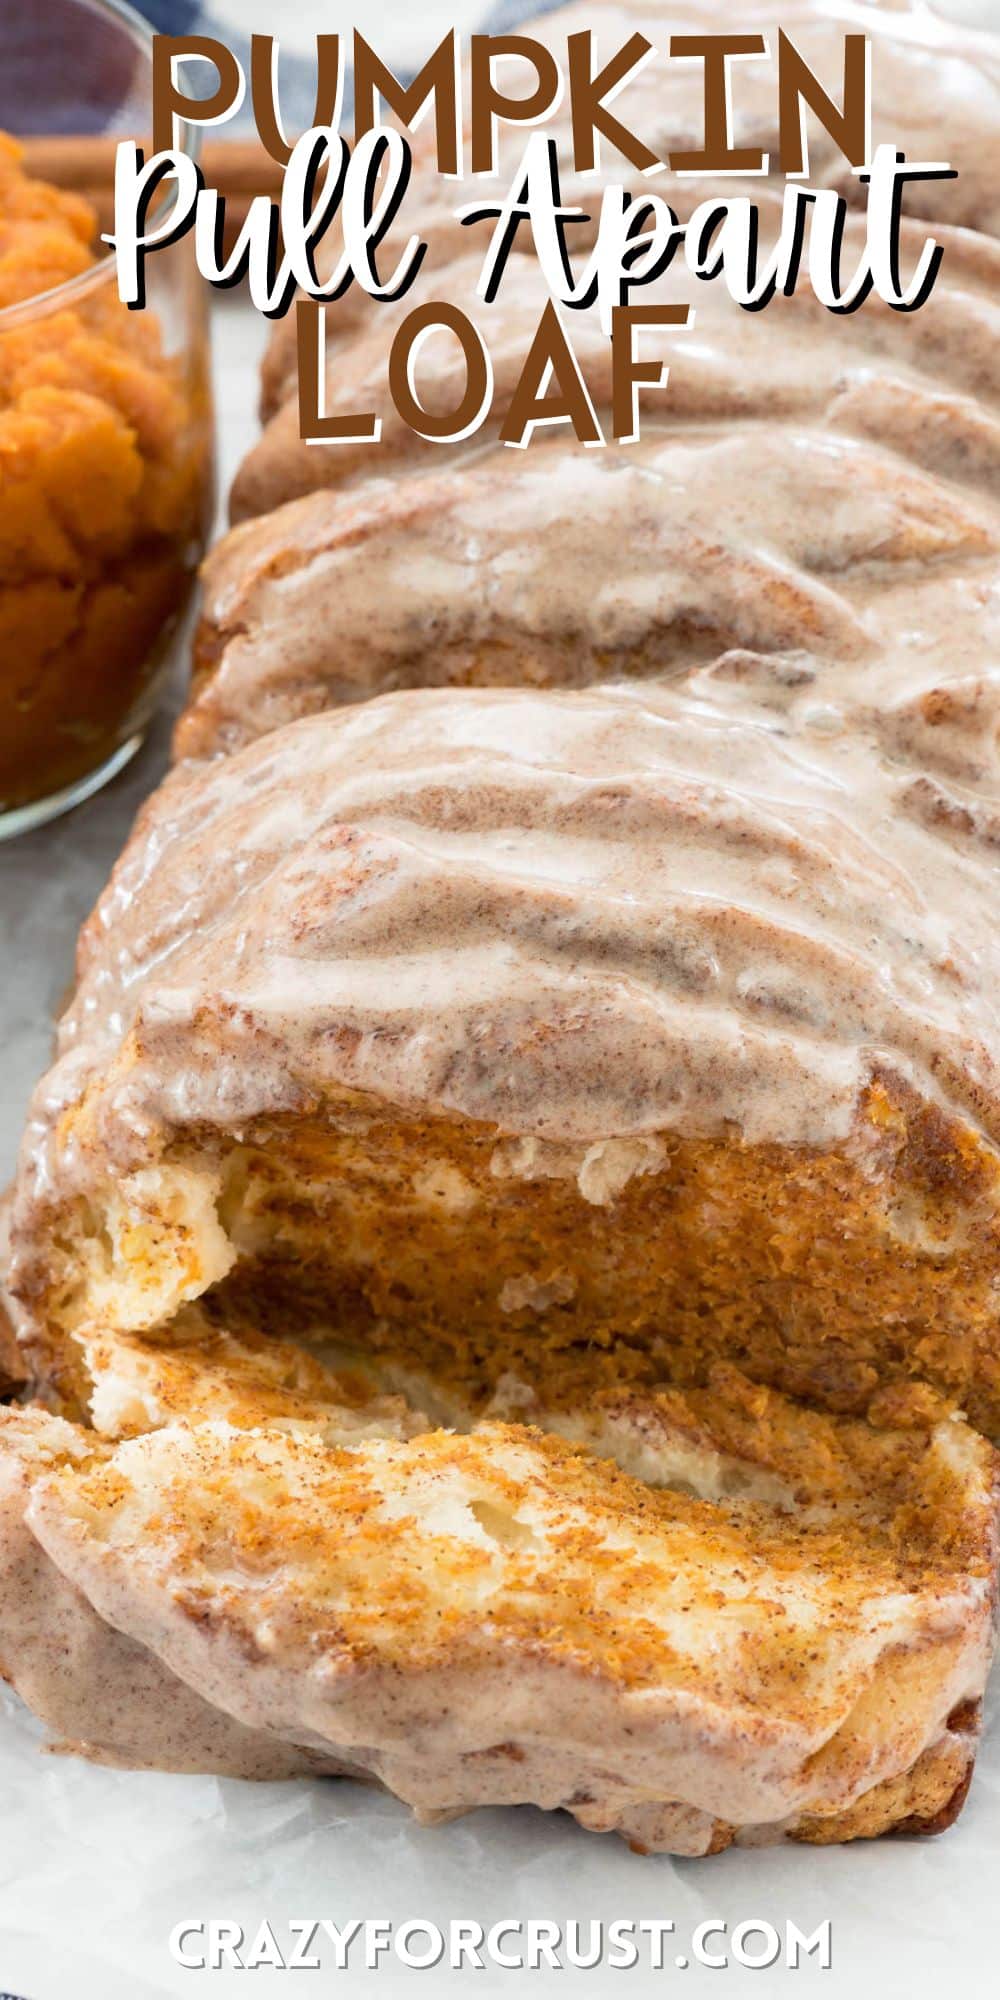 pumpkin pull apart loaf that sliced in front with words on the image.